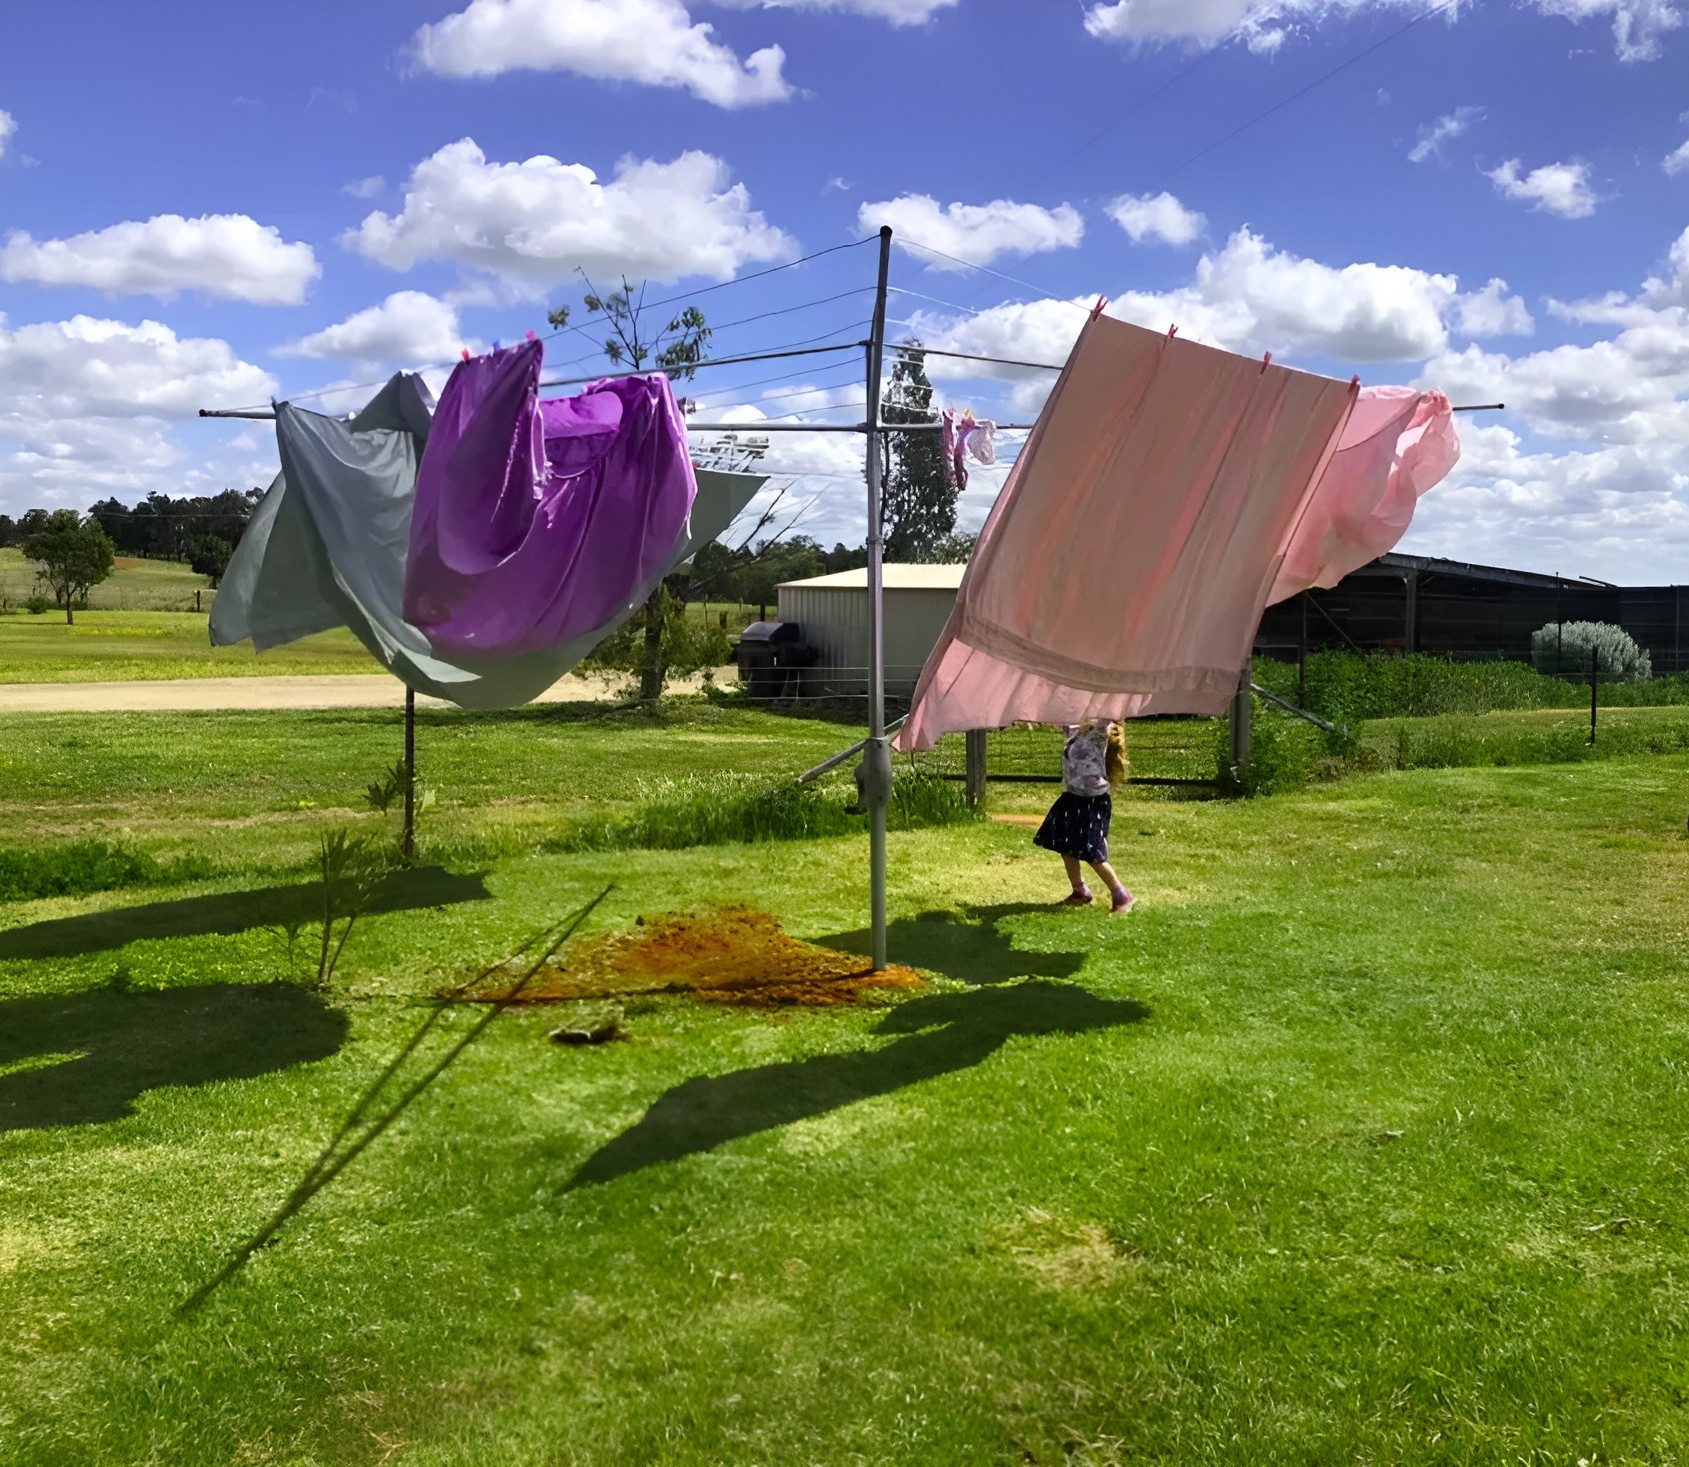 Rotary Clothesline for a Family of 5 4. Australian Lifestyle and Laundry Considerations